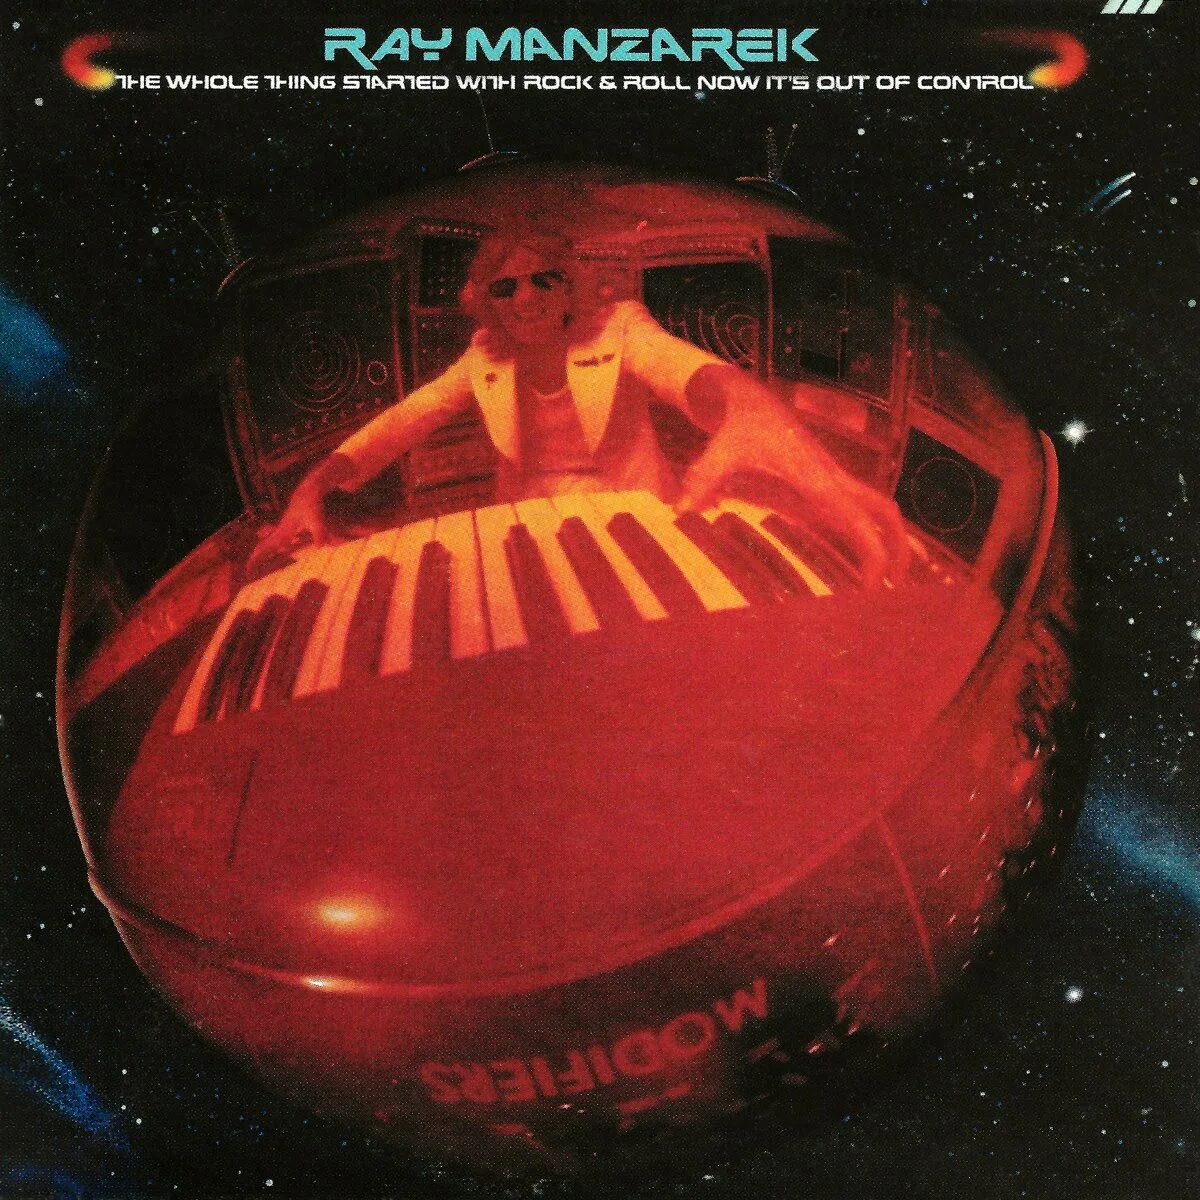 Now roll. Ray Manzarek 1974 - the whole thing started with Rock & Roll and Now it's out of Control. Ray Manzarek Rock Roll. Ray Manzarek the Golden Scarab 1974. Ray Manzarek Rock Roll Cover.